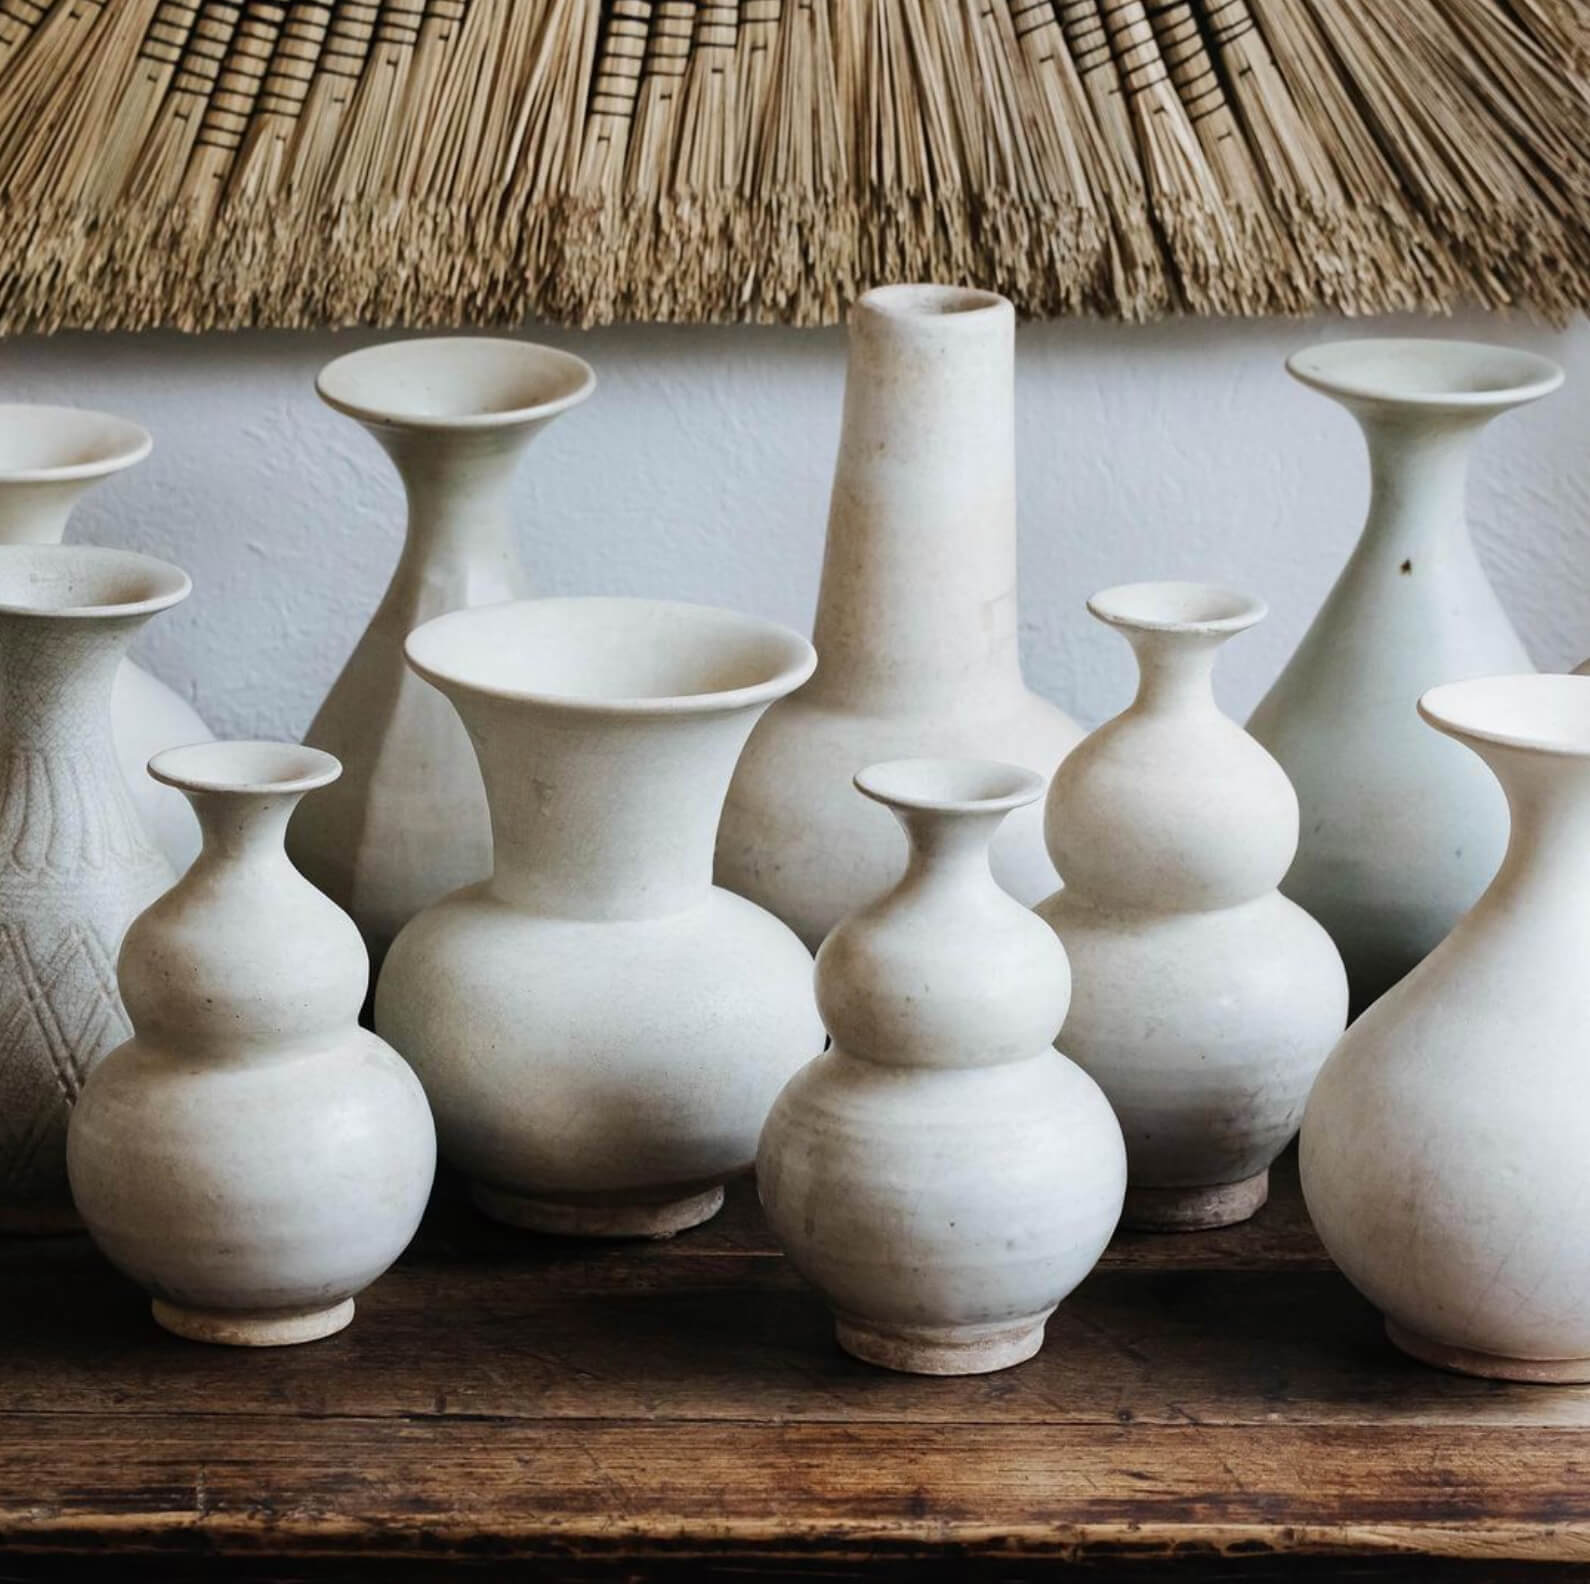 Handcrafted by local artisan, this ceramic vase will add a taste of uniqueness to any room of the house.